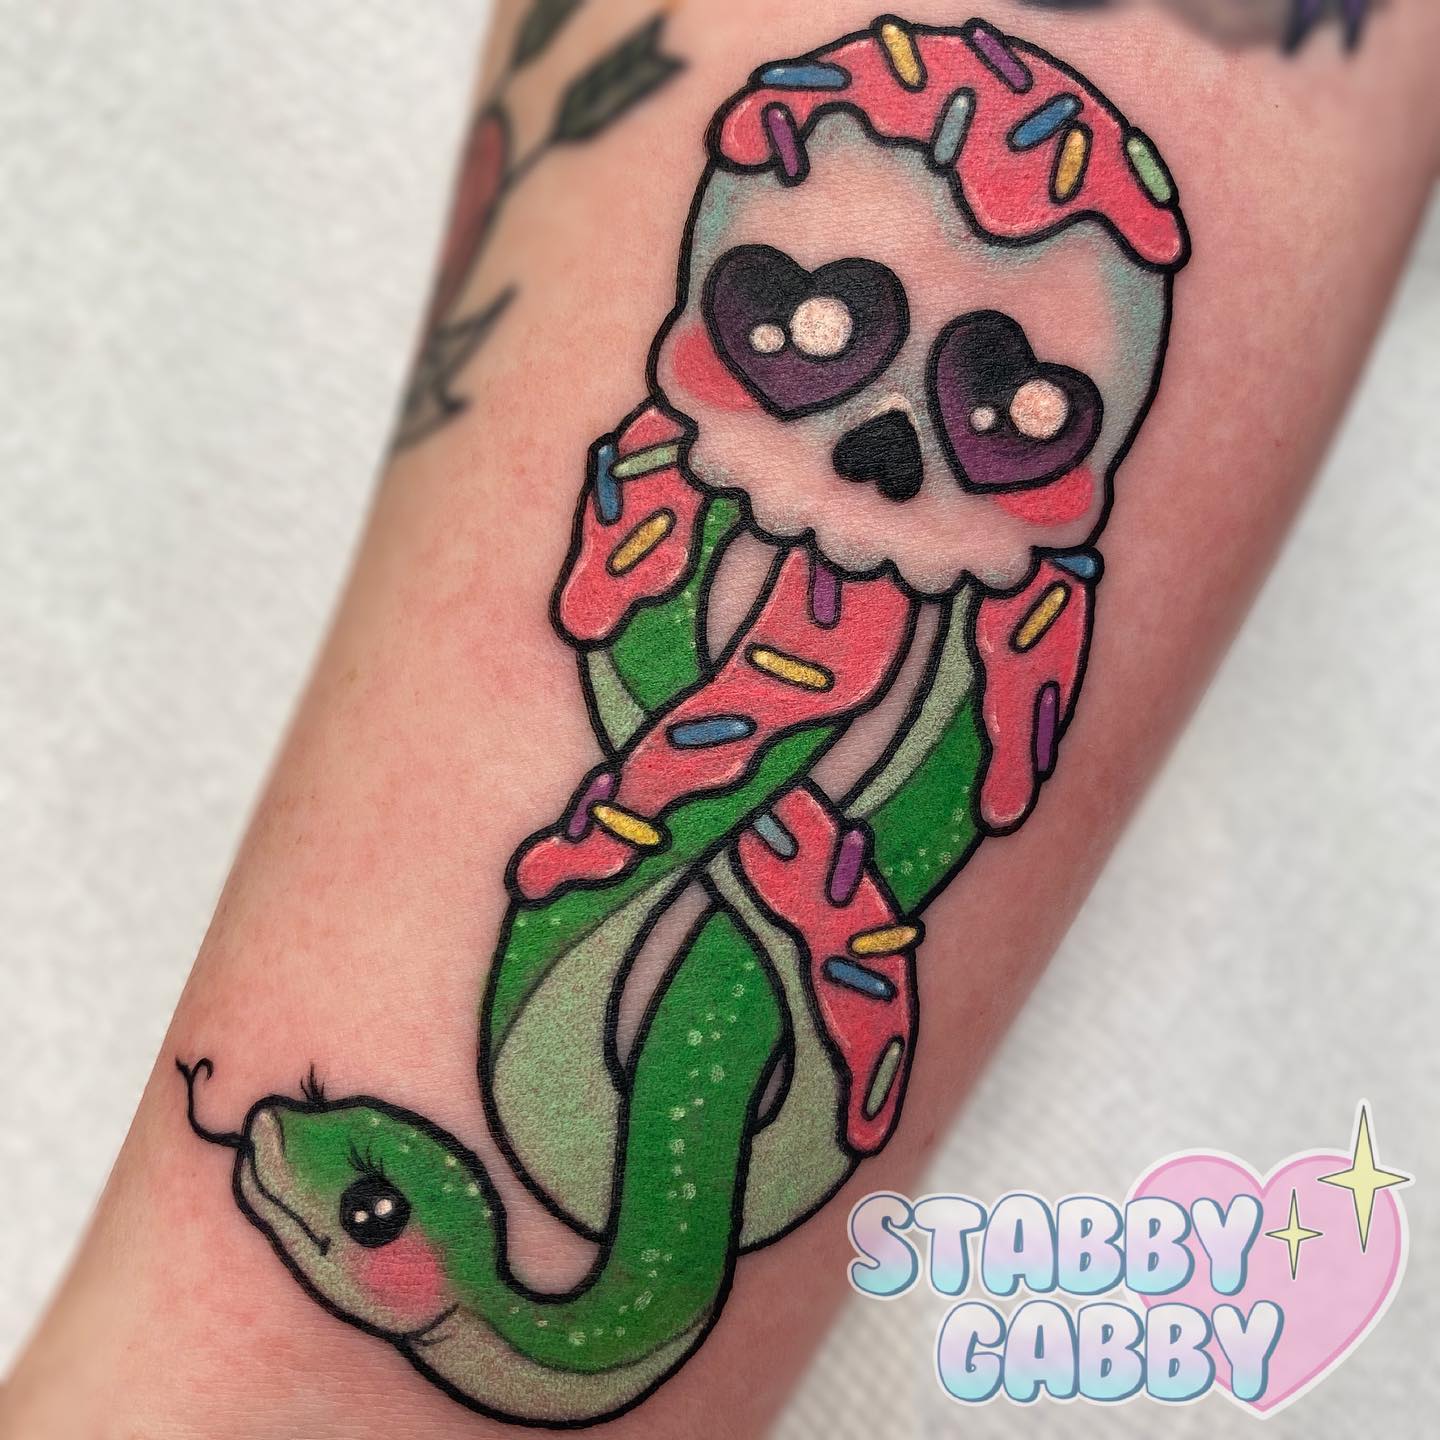 Death eaters are scary and dark, right? In this tattoo, it's the opposite because creativity talks in tattoos! A cute death eater tattoo is full of pink, a skull with hearts and a cute snake with eyelashes. It doesn't look scary at all.